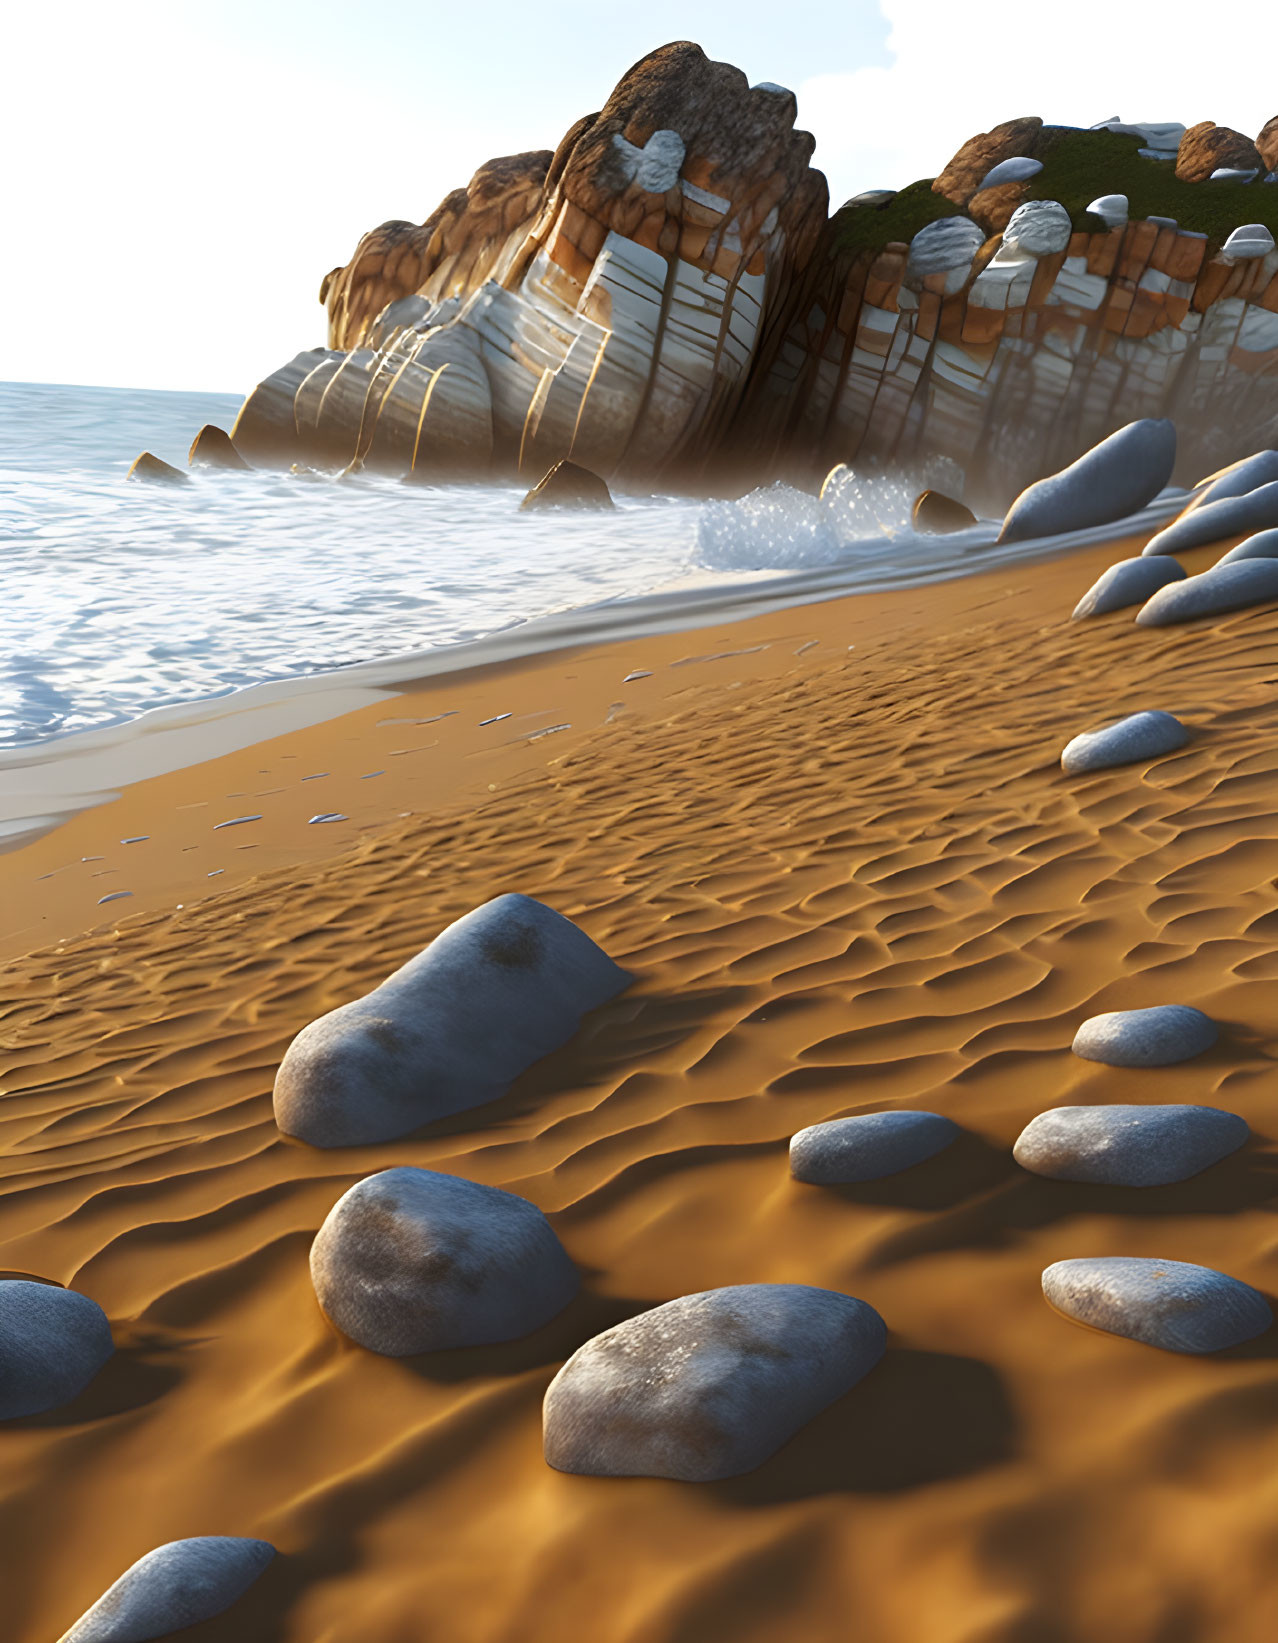 Tranquil beach scene with pebbles, golden sand, and rock formations